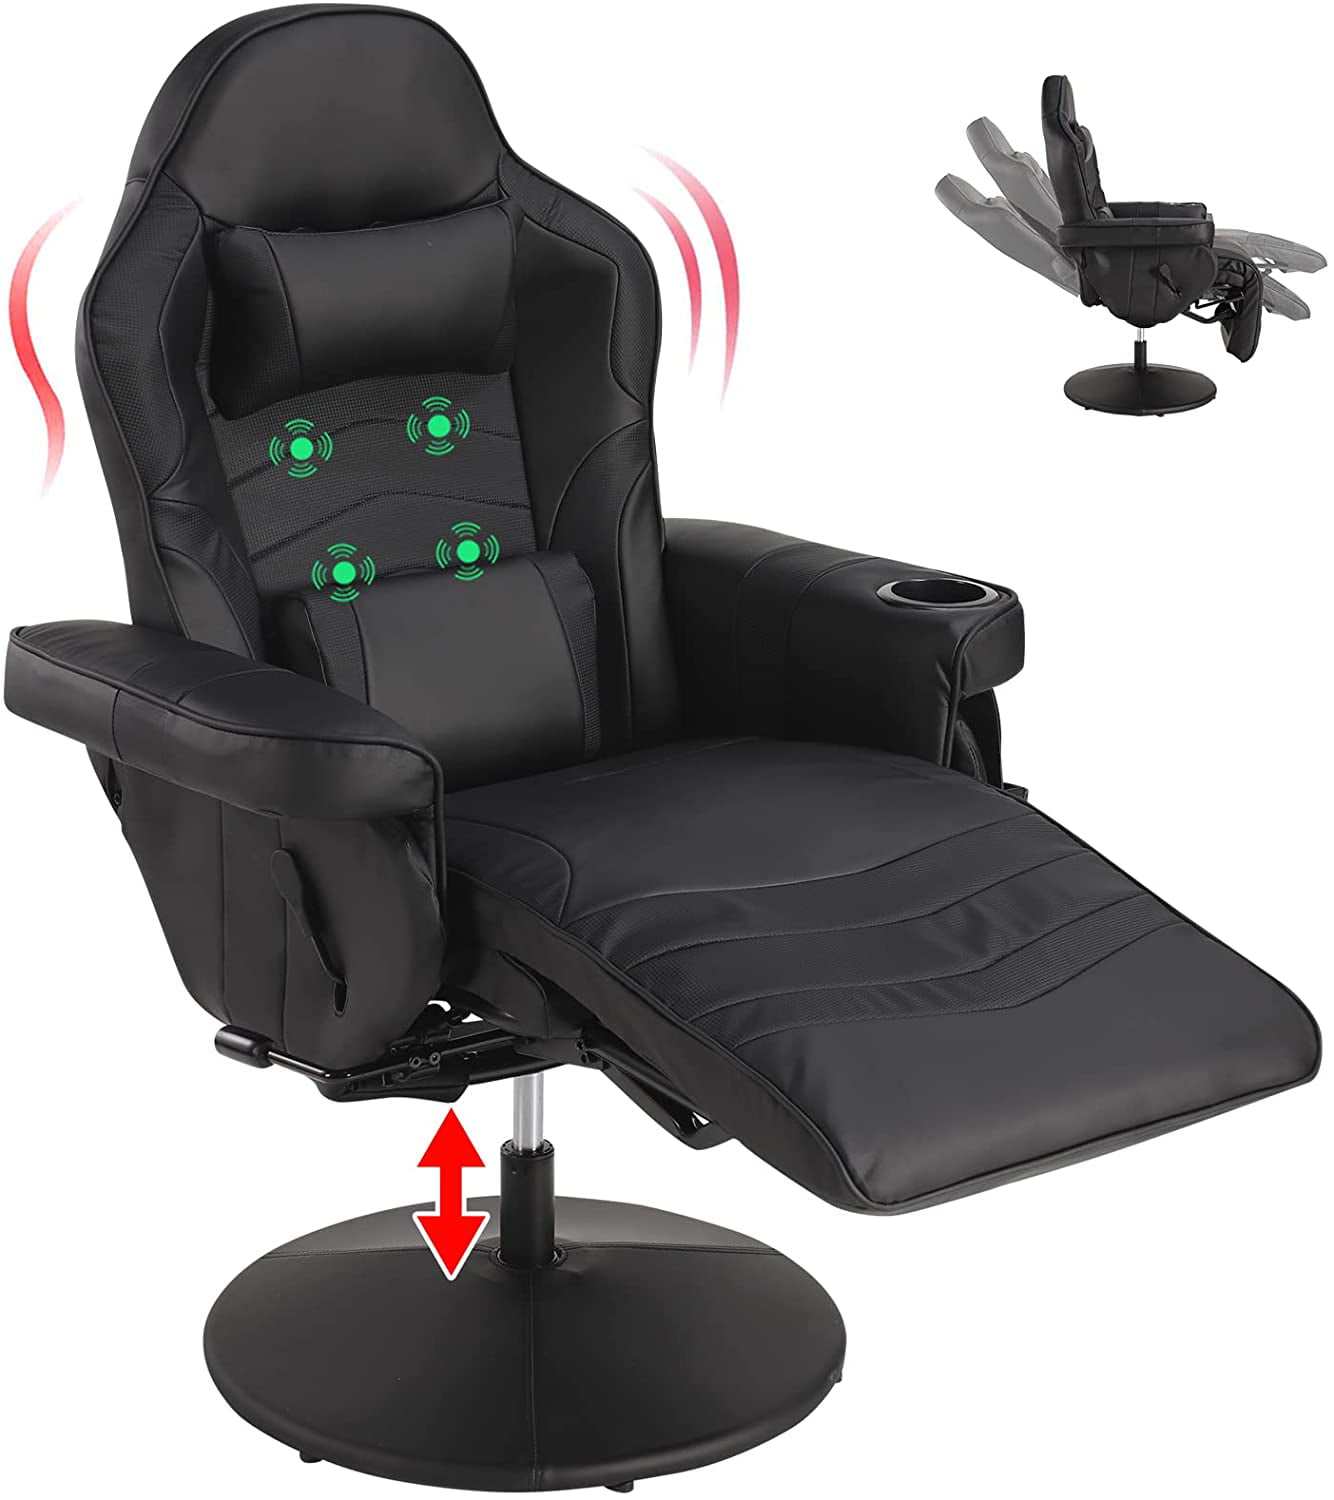 Dropship Video Game Chairs For Adults, PU Leather Gaming Chair With Footrest,  360°Swivel Adjustable Lumbar Pillow Gamer Chair, Comfortable Computer Chair  For Heavy People to Sell Online at a Lower Price